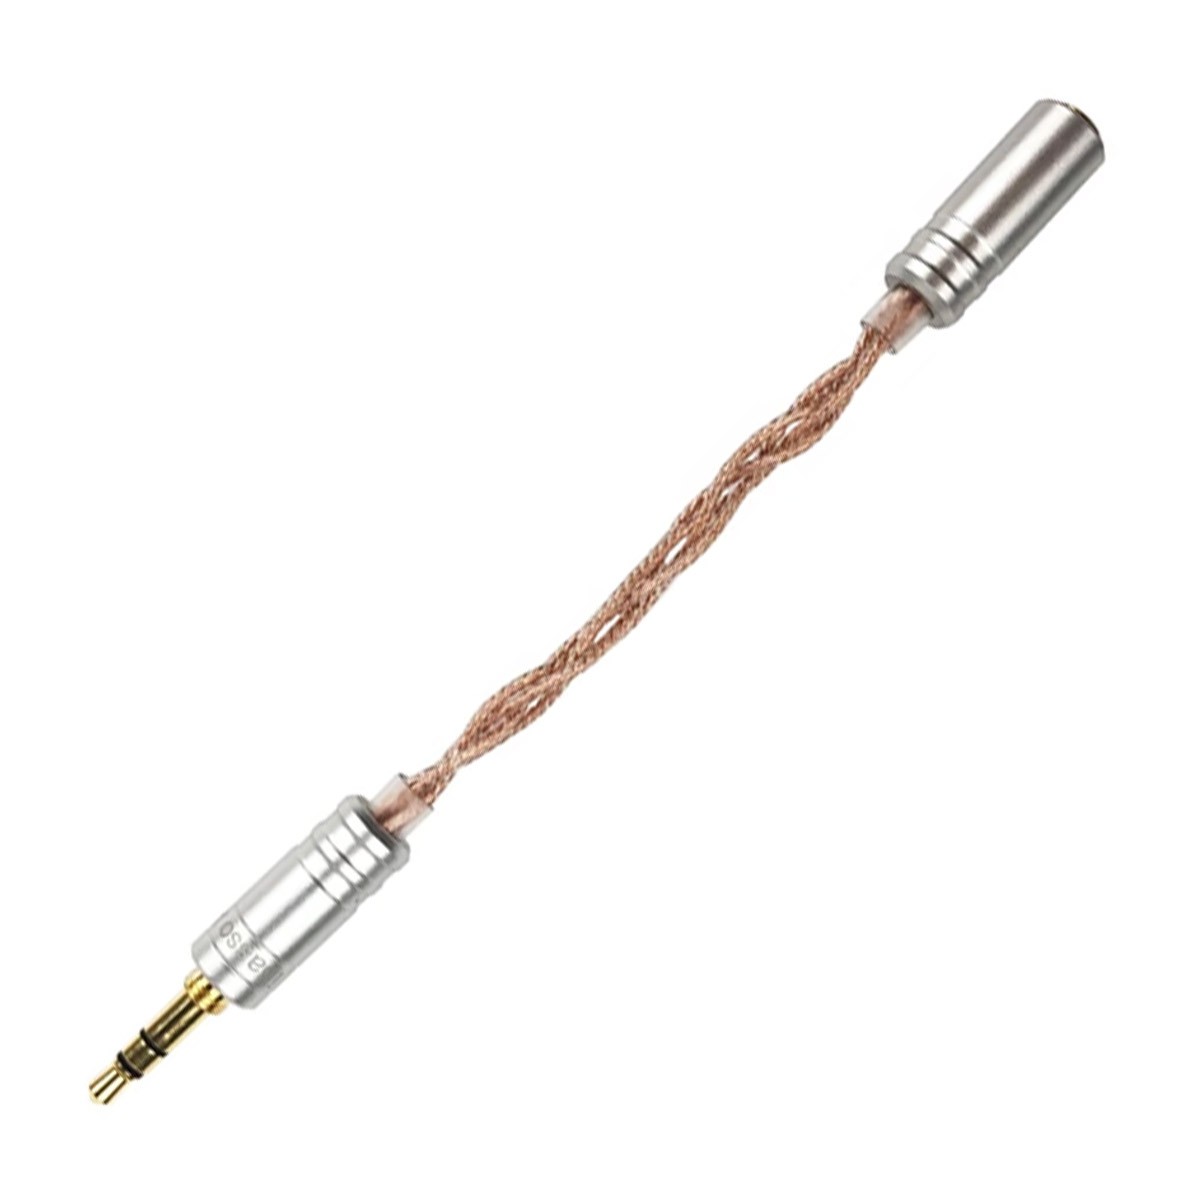 IBASSO CA01 Female Balanced Jack 2.5mm to Male Single-Ended Jack 3.5mm Adapter OFC Copper Gold Plated 10cm